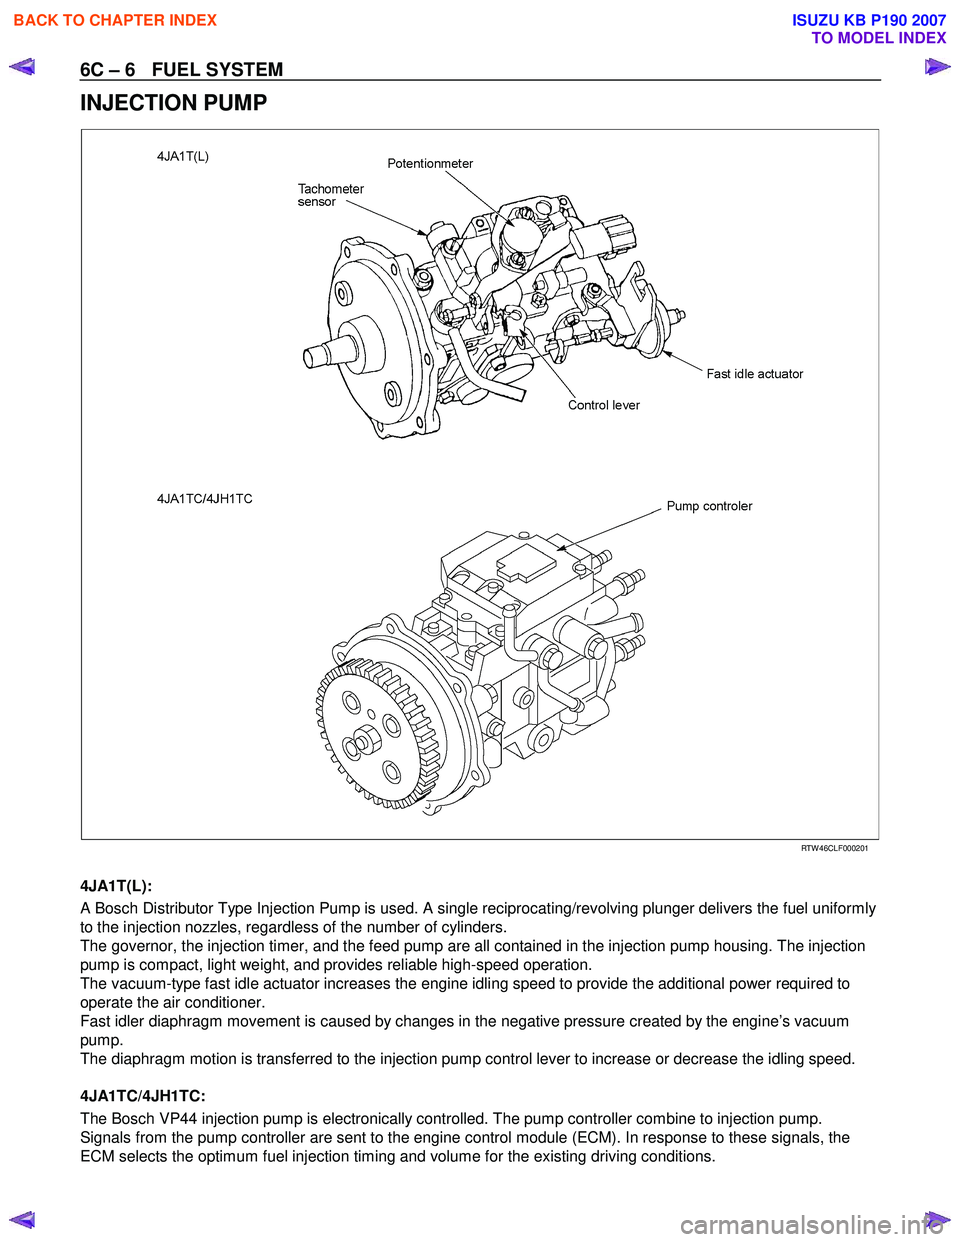 ISUZU KB P190 2007  Workshop Repair Manual 6C – 6   FUEL SYSTEM 
INJECTION PUMP 
  
 
 
RTW 46CLF000201 
  
4JA1T(L):  
A Bosch Distributor Type Injection Pump is used. A single reciprocating/revolving plunger delivers the fuel uniformly  
t